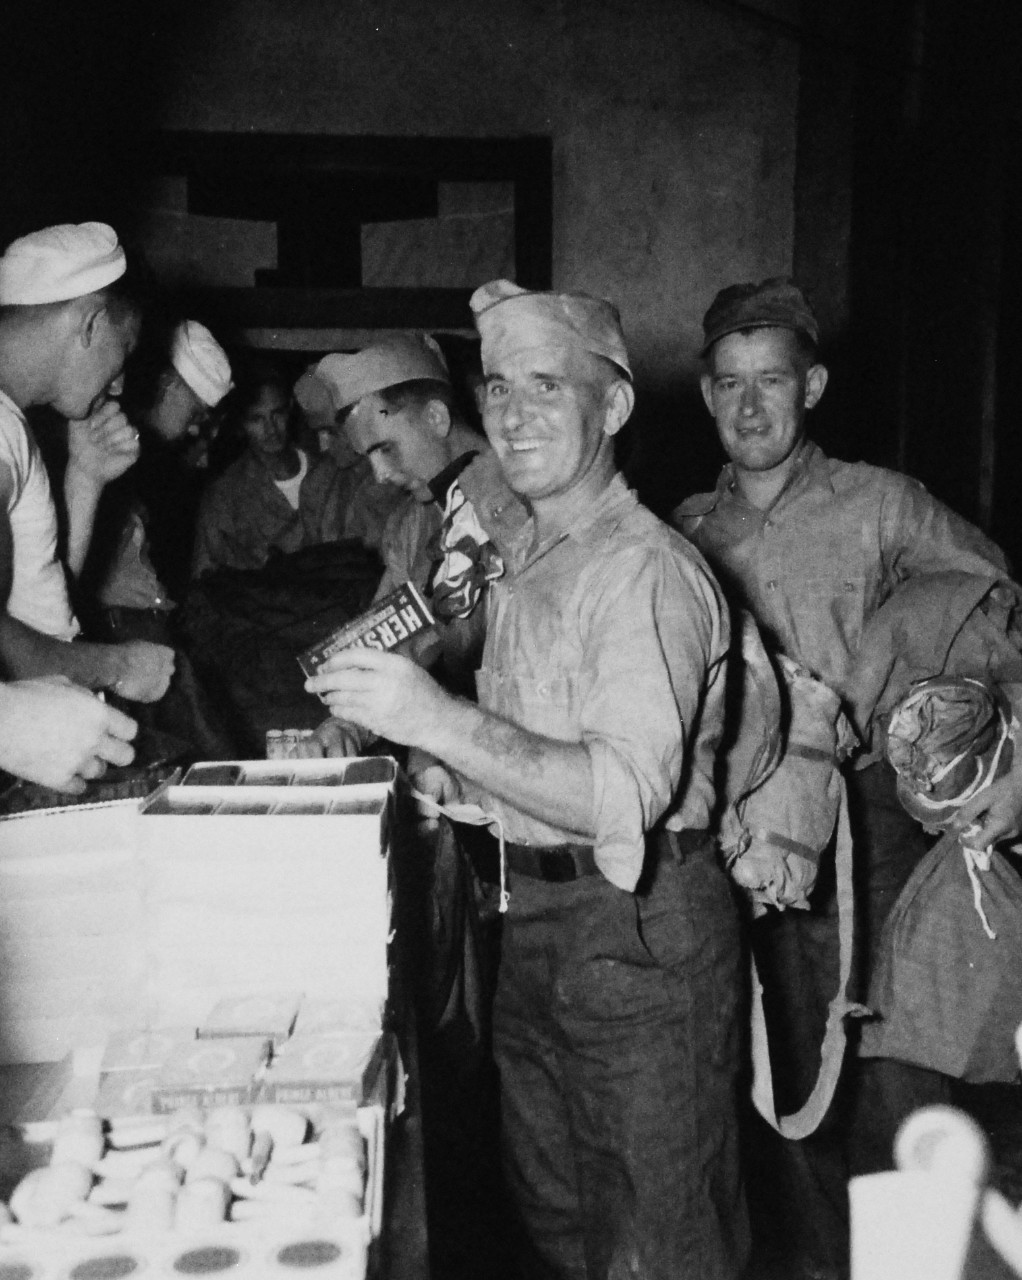 80-G-346581: Allied Prisoners of War, 1945.     J. Payne, who was a British Prisoner of War on Koyagi Island prison camp, is now going through the liberation routine at the Nagasaki Evacuation Center.   He is getting lunch and complete Red Cross Kit.   Photographed by crew of USS Chenango (CVE-28), 13 September 1945.  Official U.S. Navy photograph, now in the collections of the National Archives.   (2014/11/5).